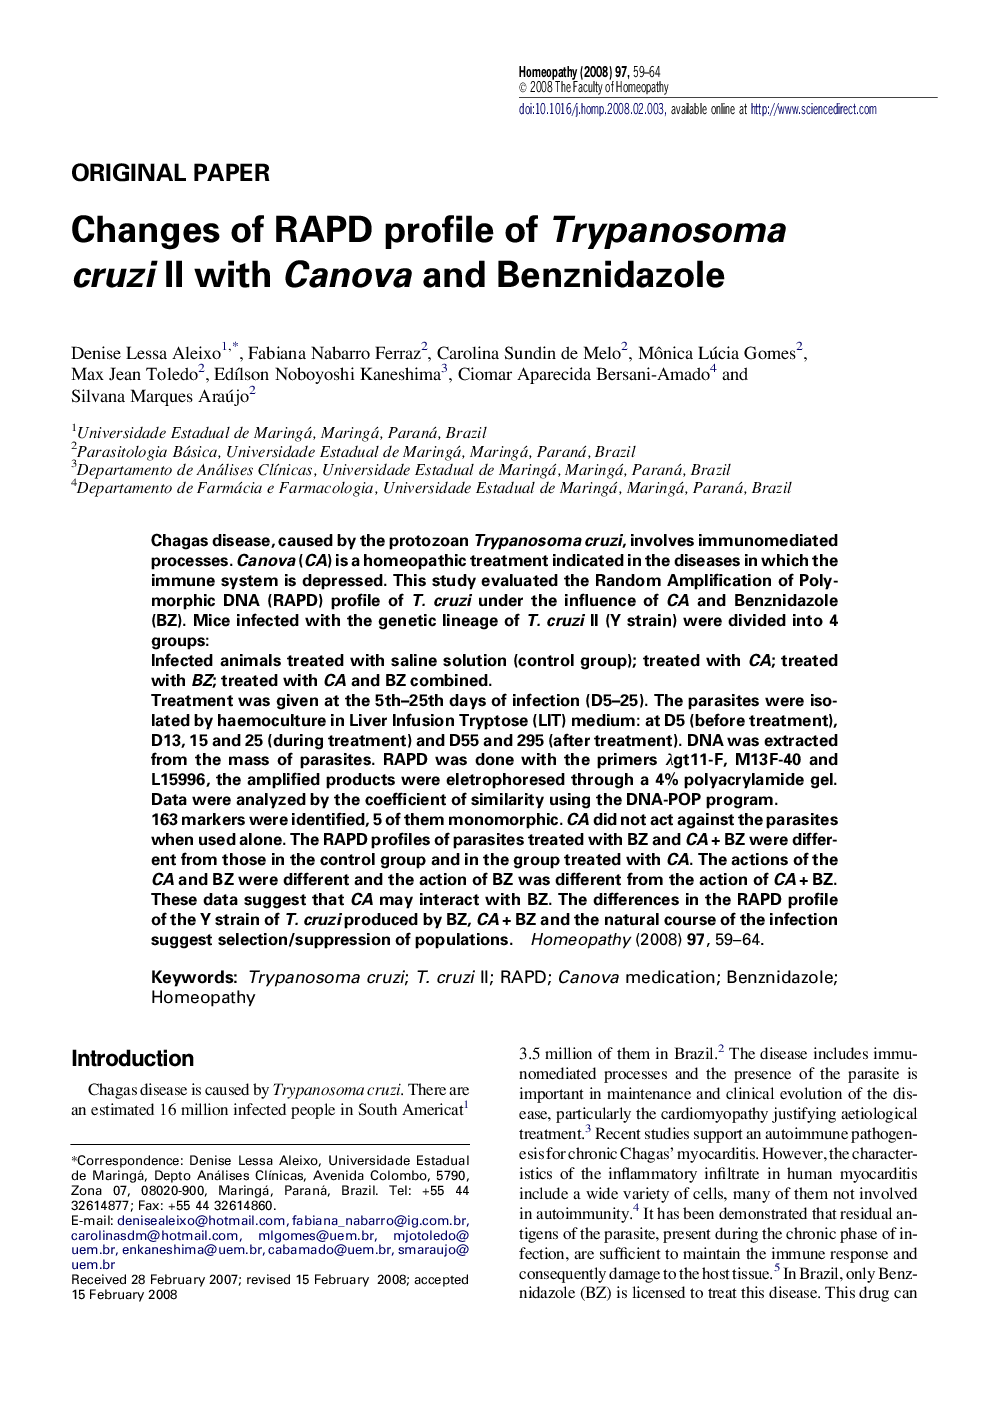 Changes of RAPD profile of Trypanosoma cruzi II with Canova and Benznidazole